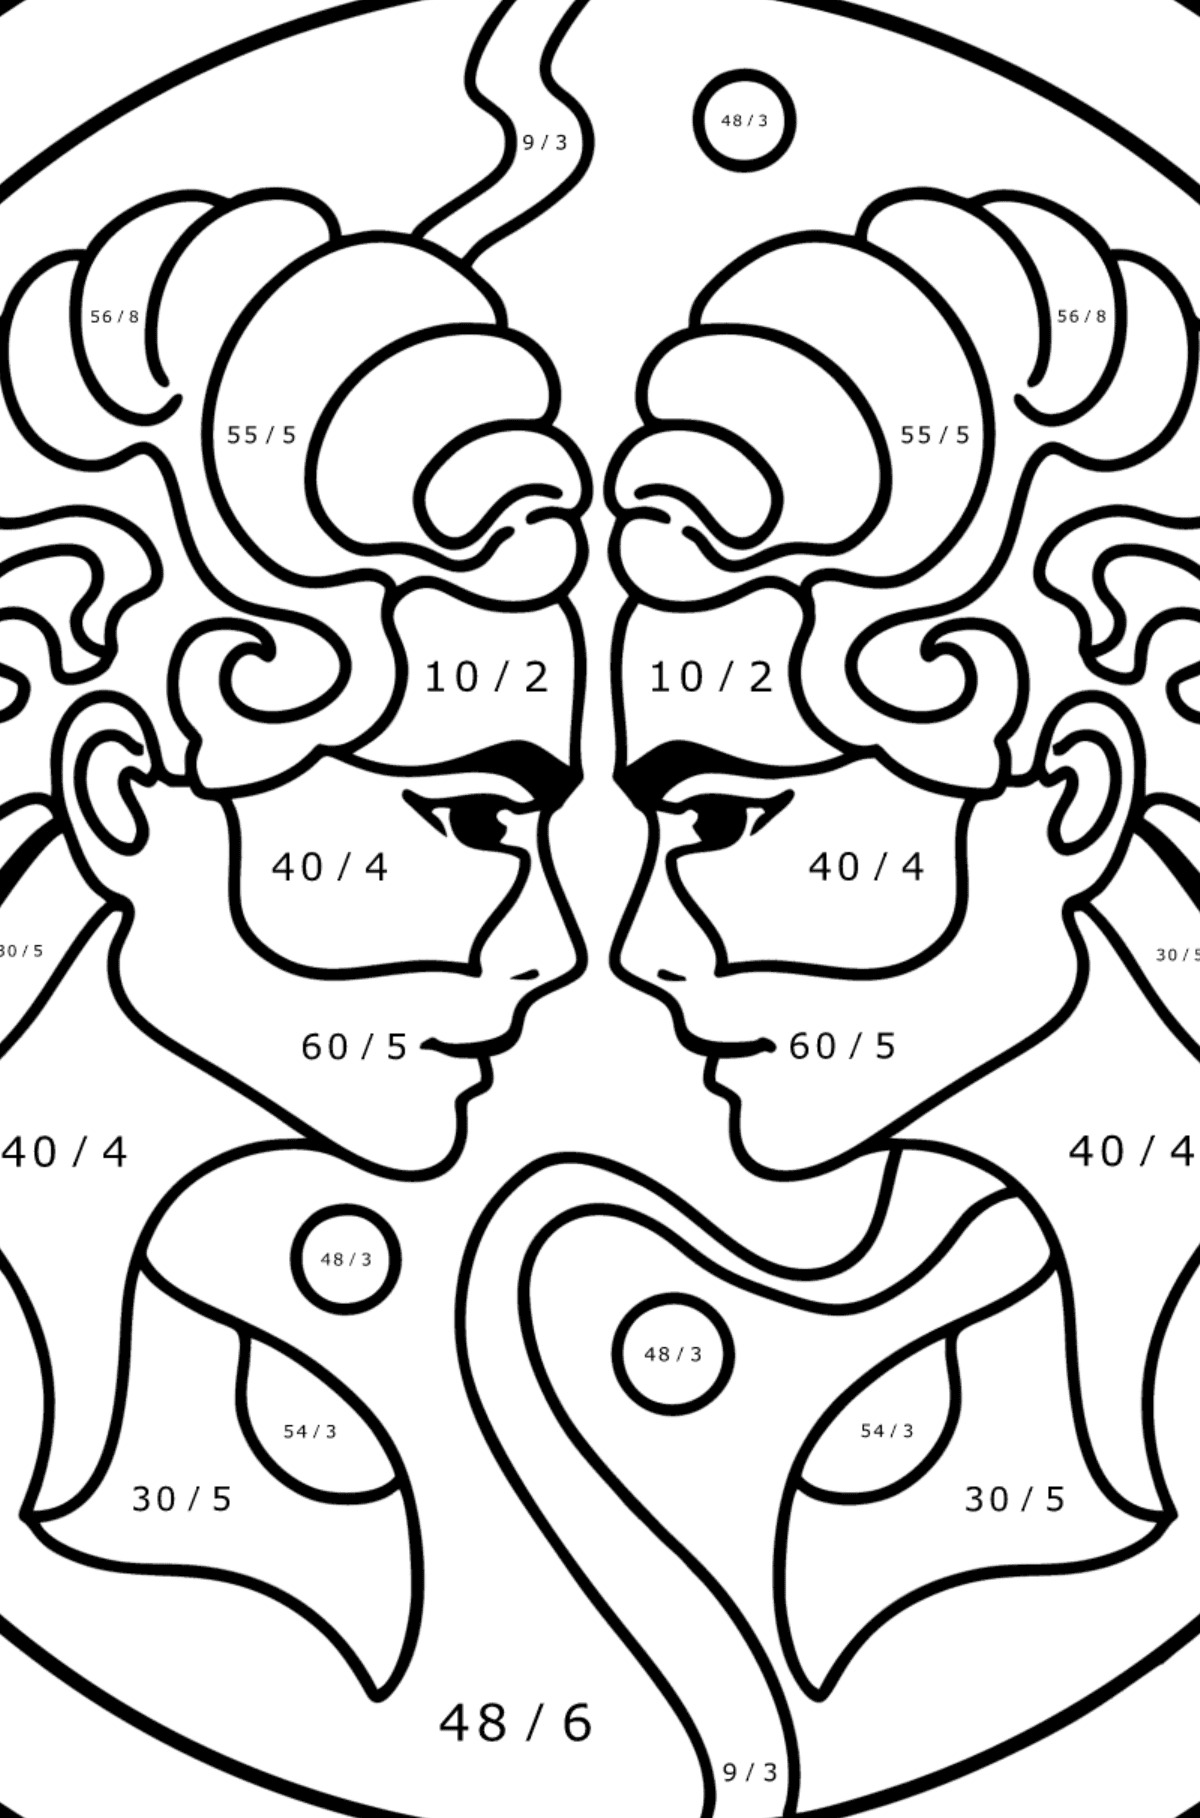 Coloring page for kids - Gemini zodiac sign - Math Coloring - Division for Kids